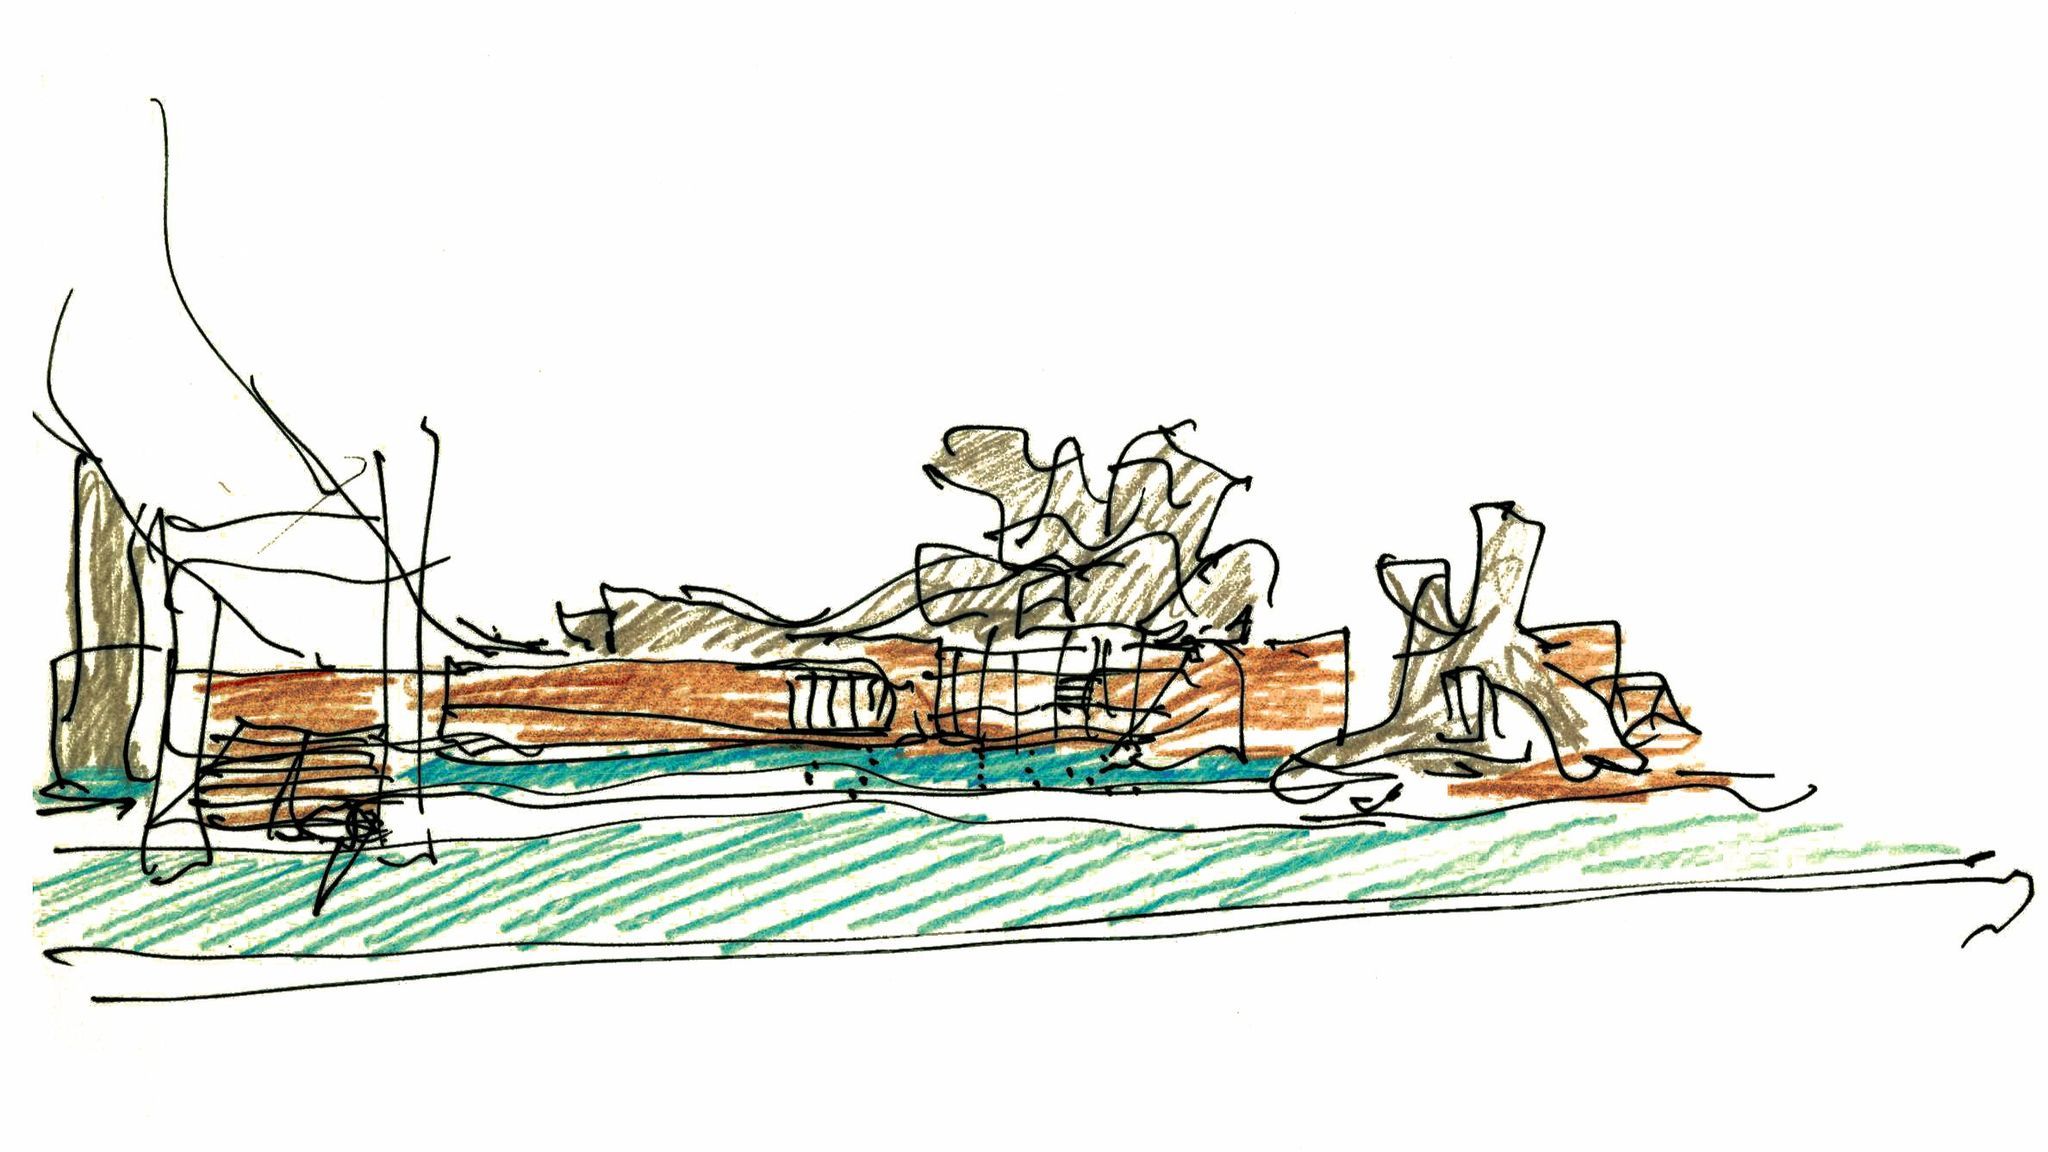 Frank Gehry's sketch of the Bilbao museum.